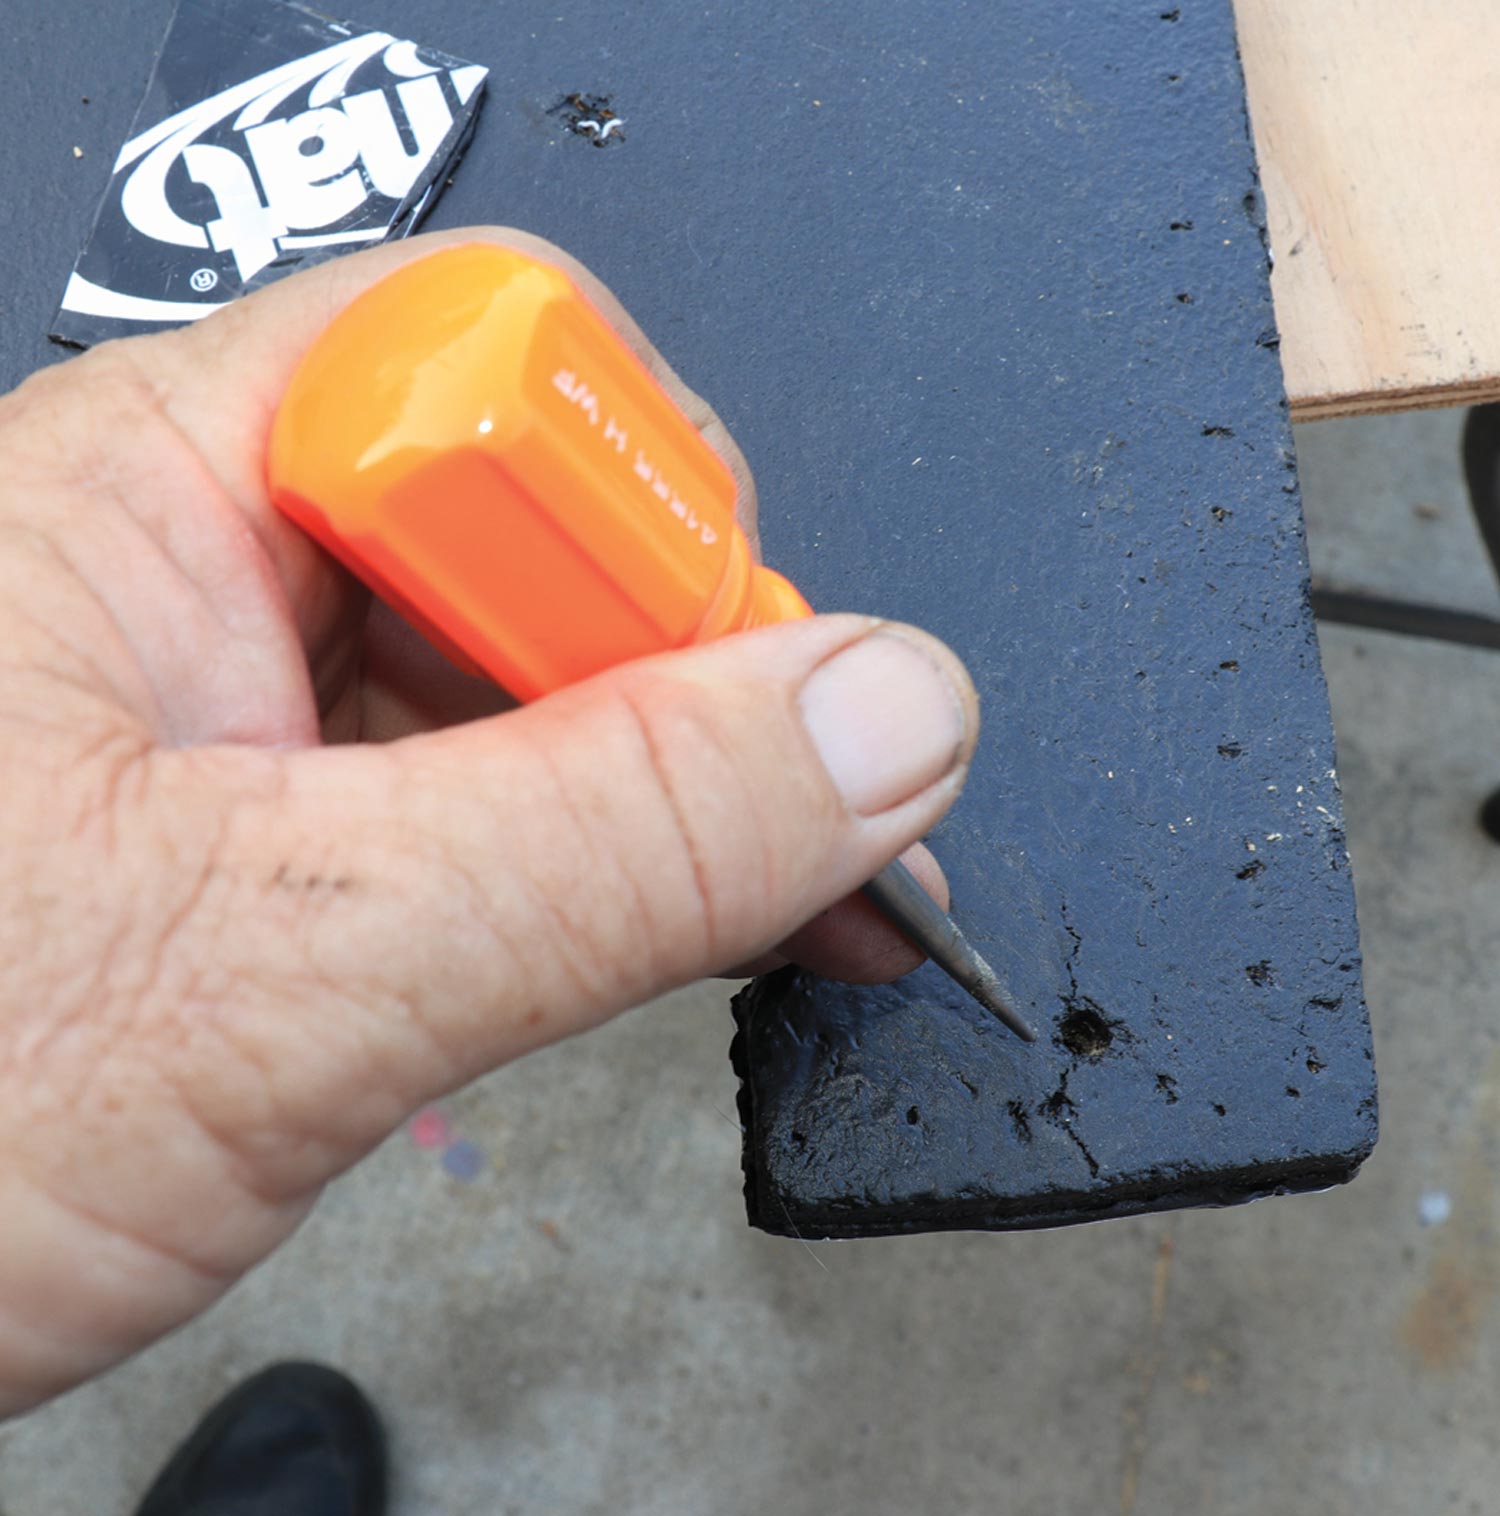 a scratch awl is used to punch out the mounting holes beneath the Dynamat sheet